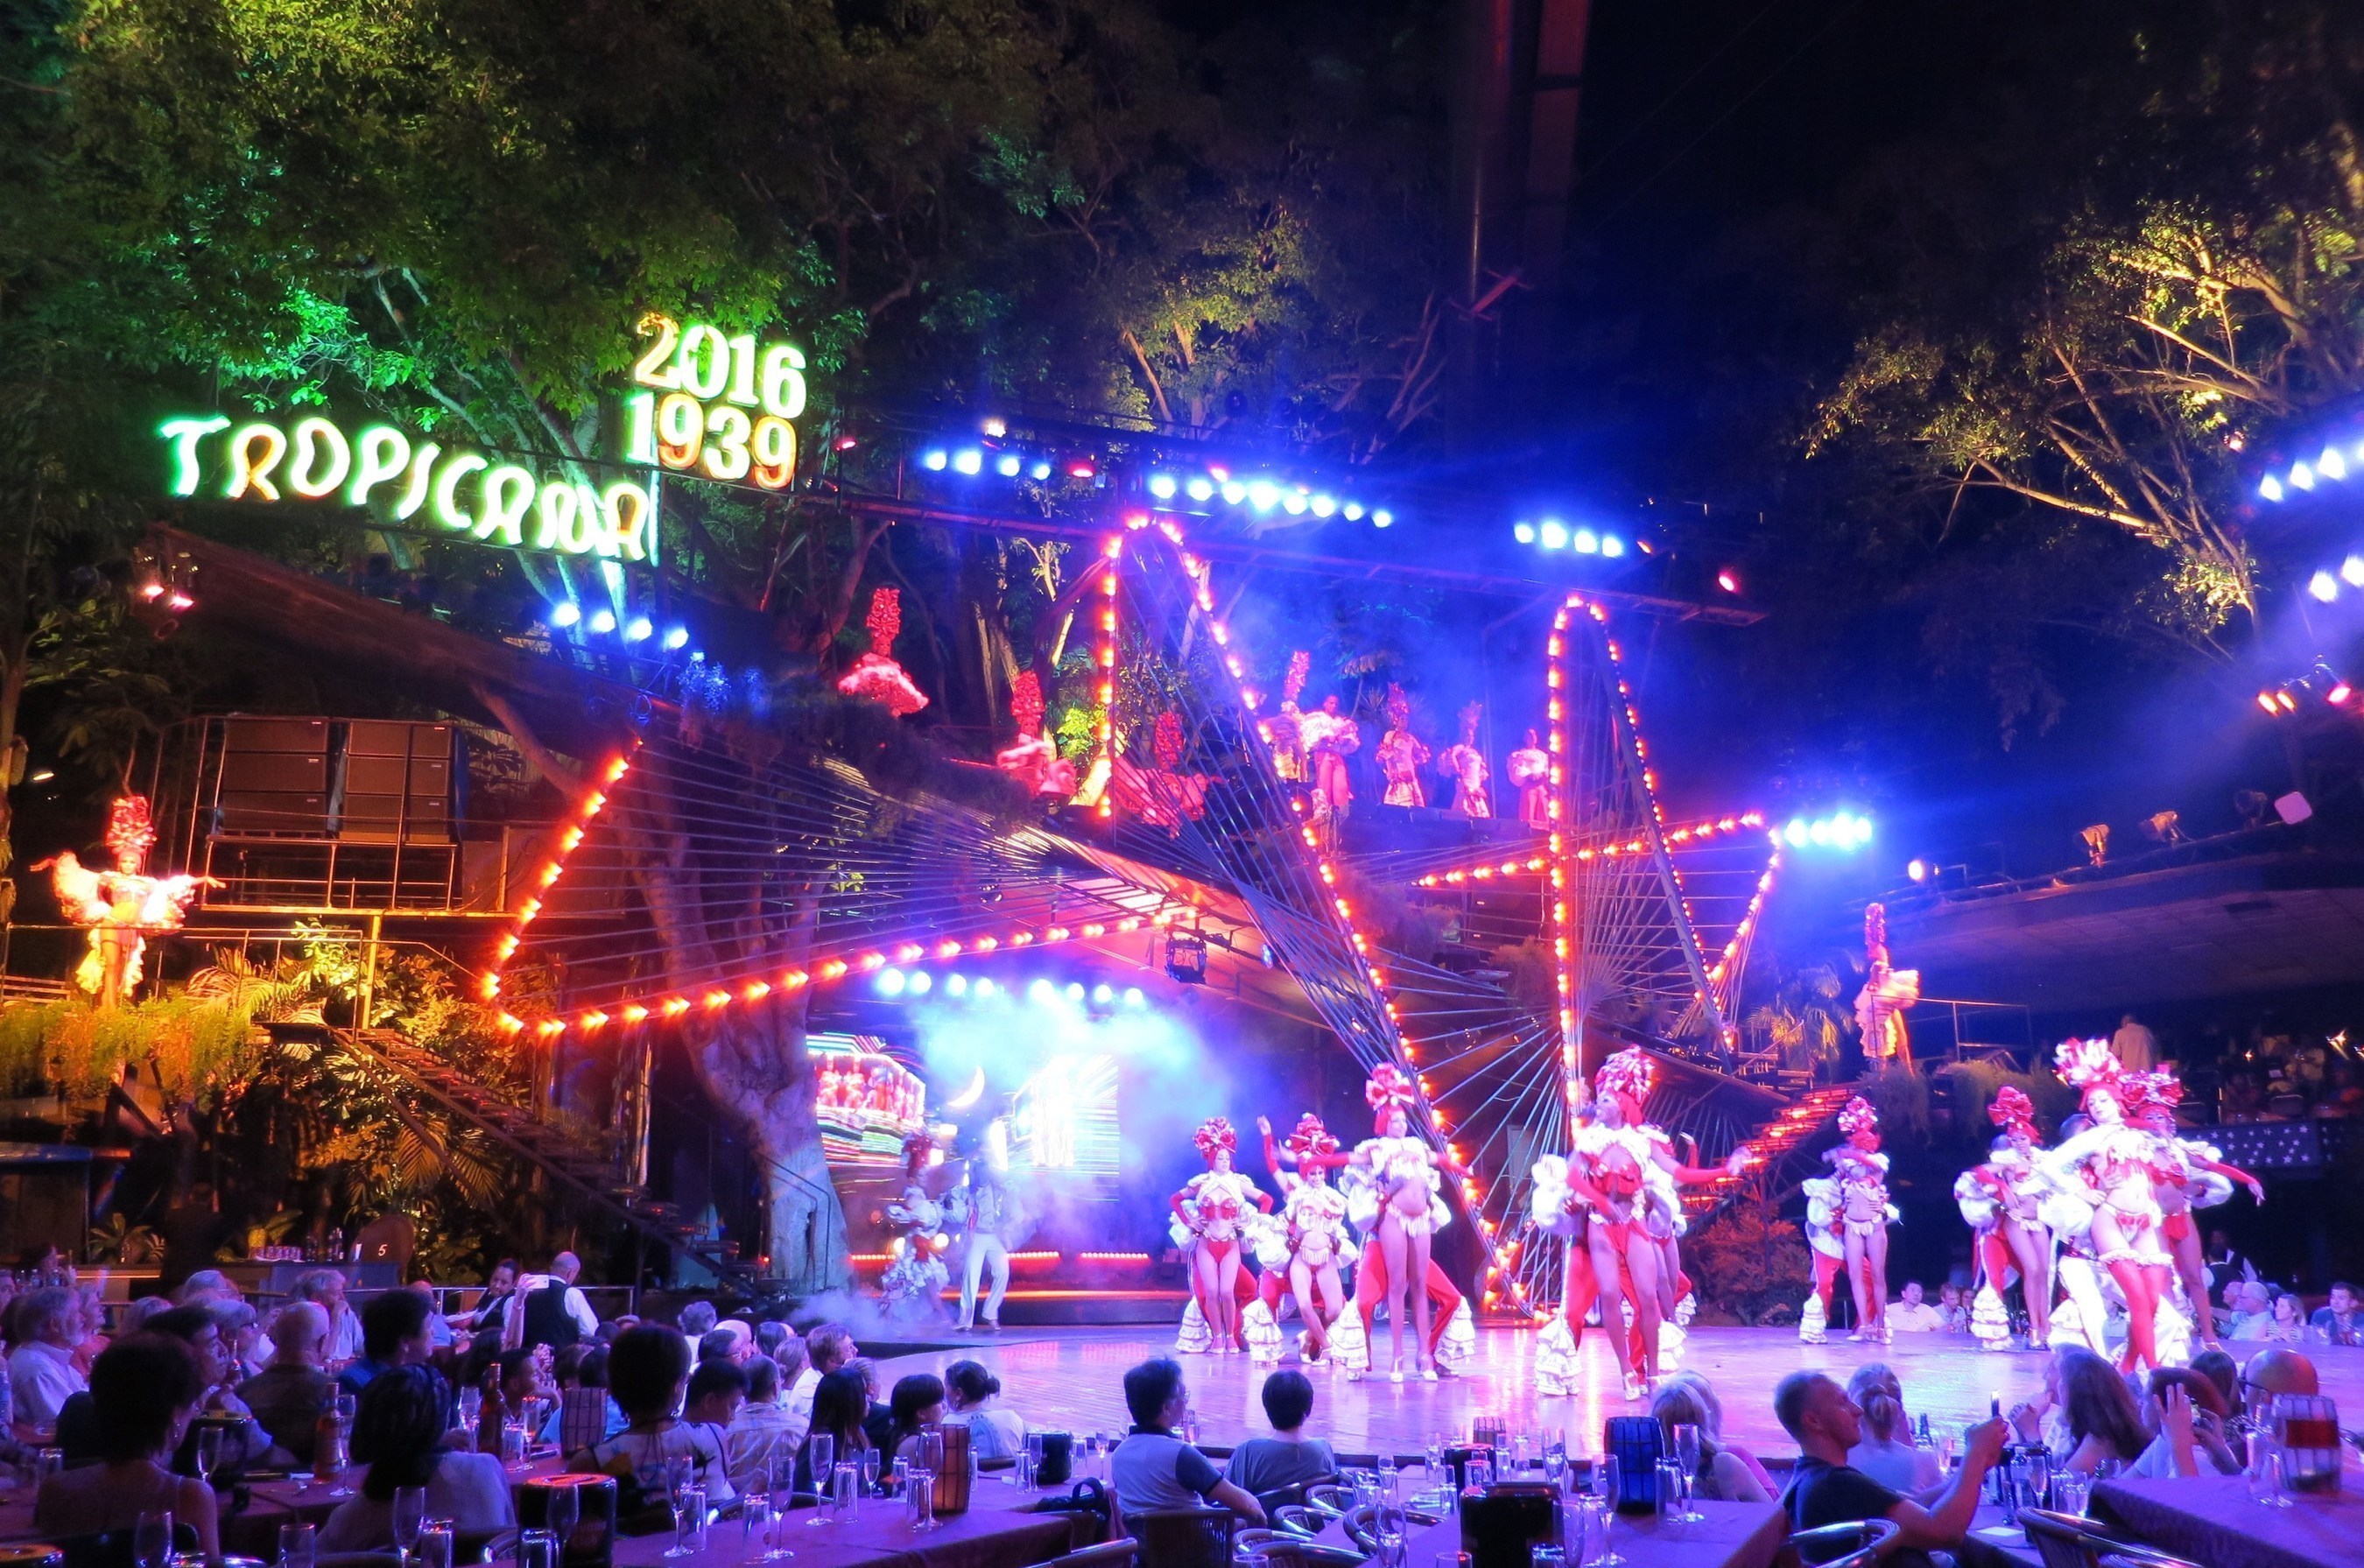 Many of the passengers from Carnival Corporation's Fathom Adonia cruise ship spent their first evening in Havana on May 2 at the famous Tropicana club, where elaborately costumed dancers and singers perform on different stages throughout the outdoor venue.